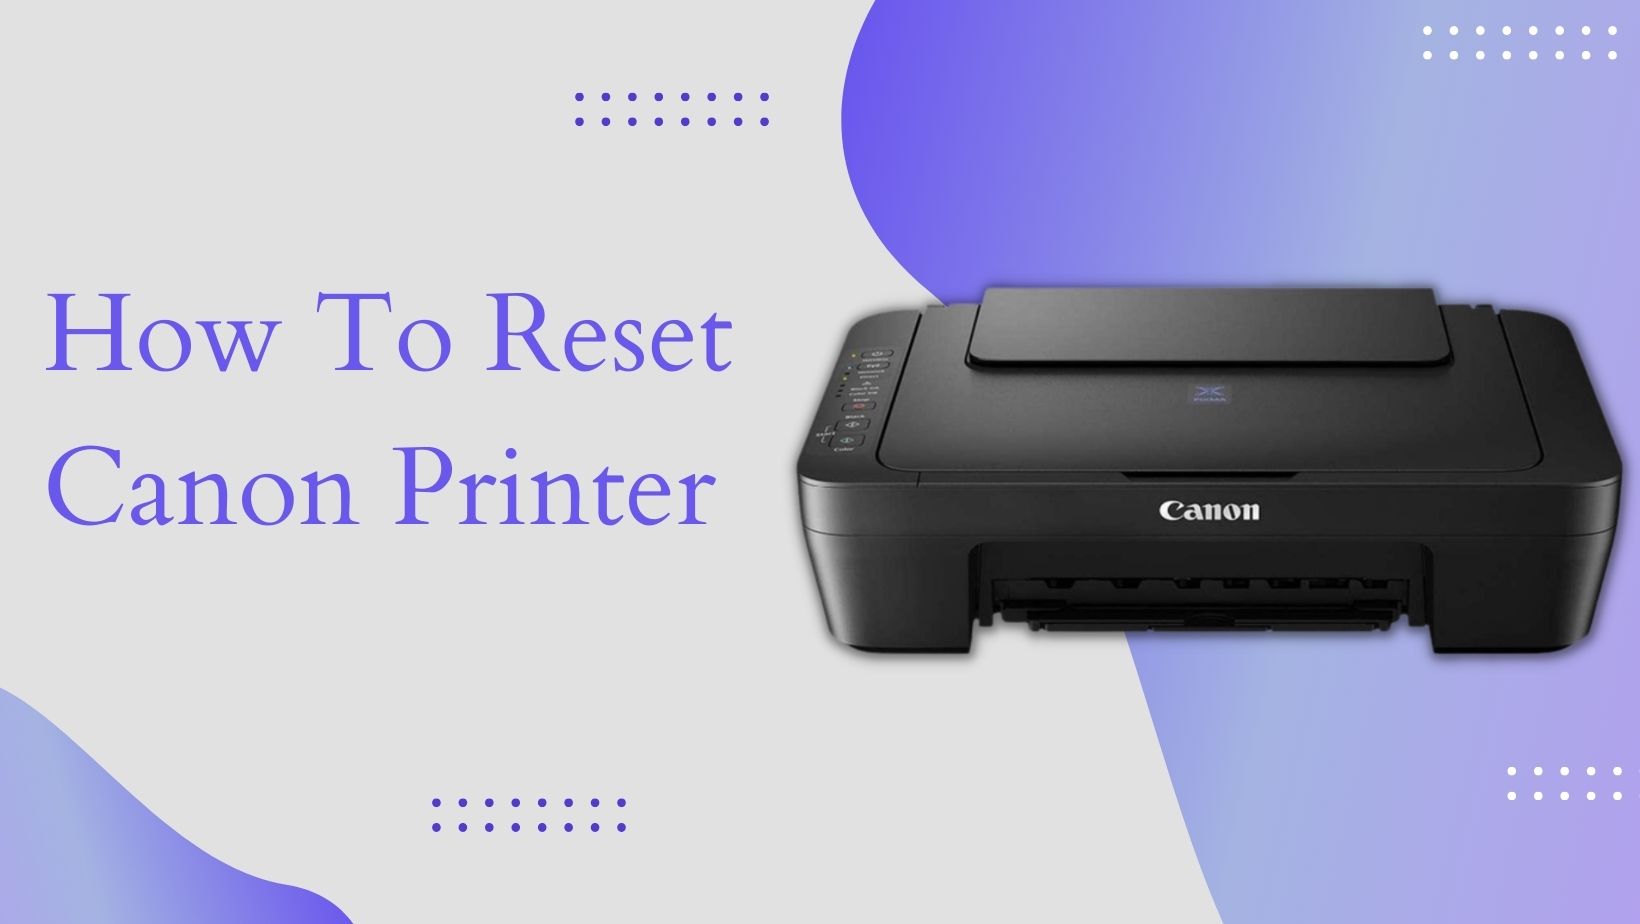 How To Reset Canon Printer